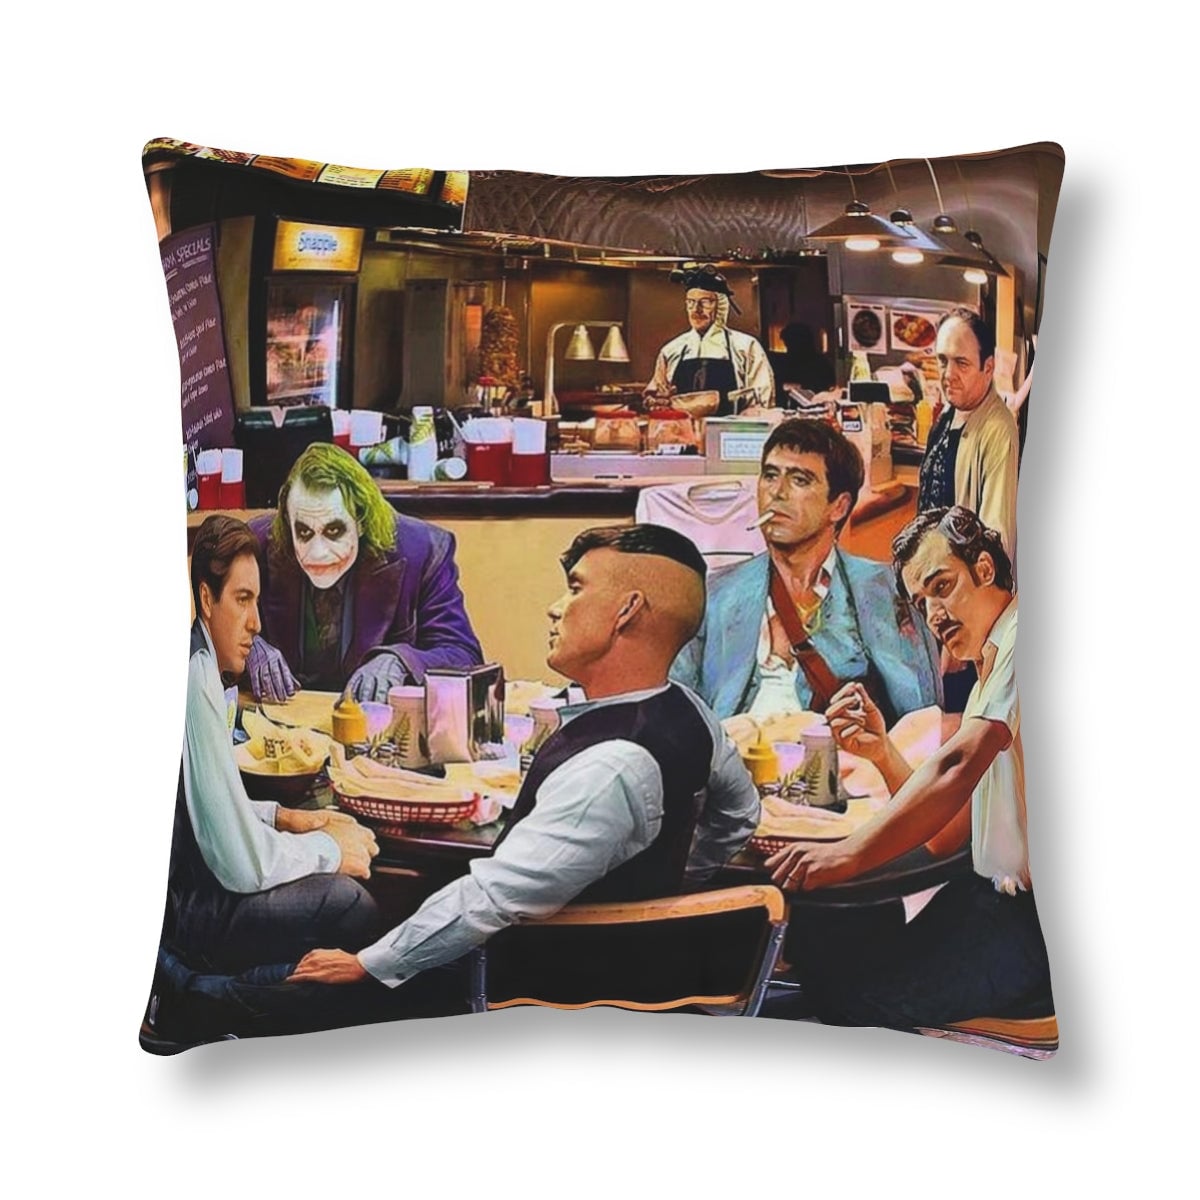 The Best Famous Mobster Movies of All Time Waterproof Pillows